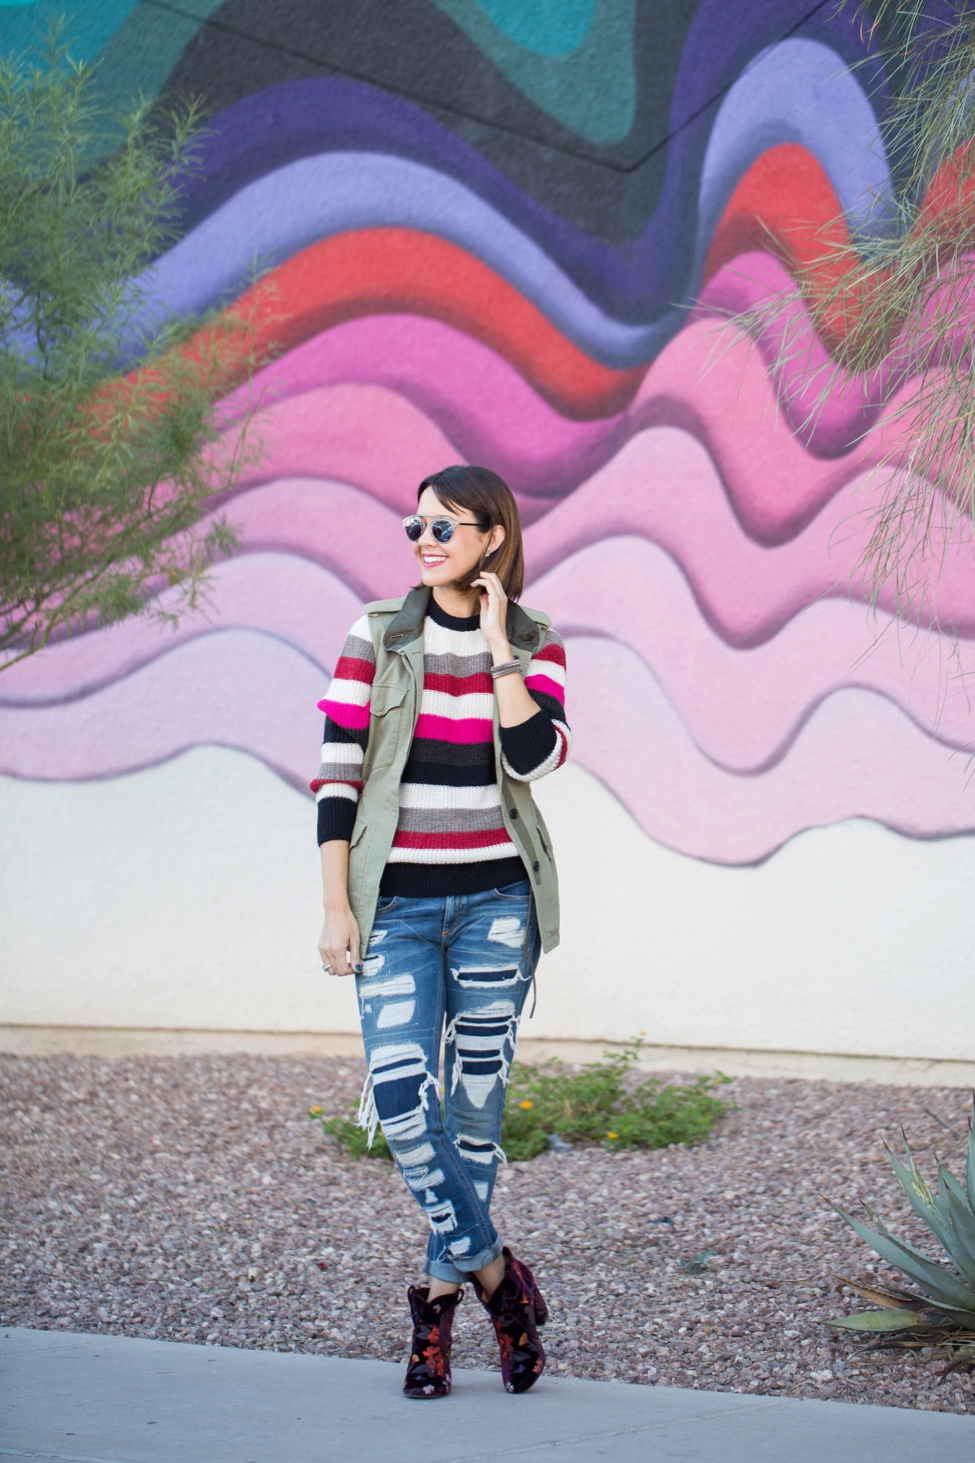 Fall Fashion Can Be Fun and Colorful | Wear + Where + Well